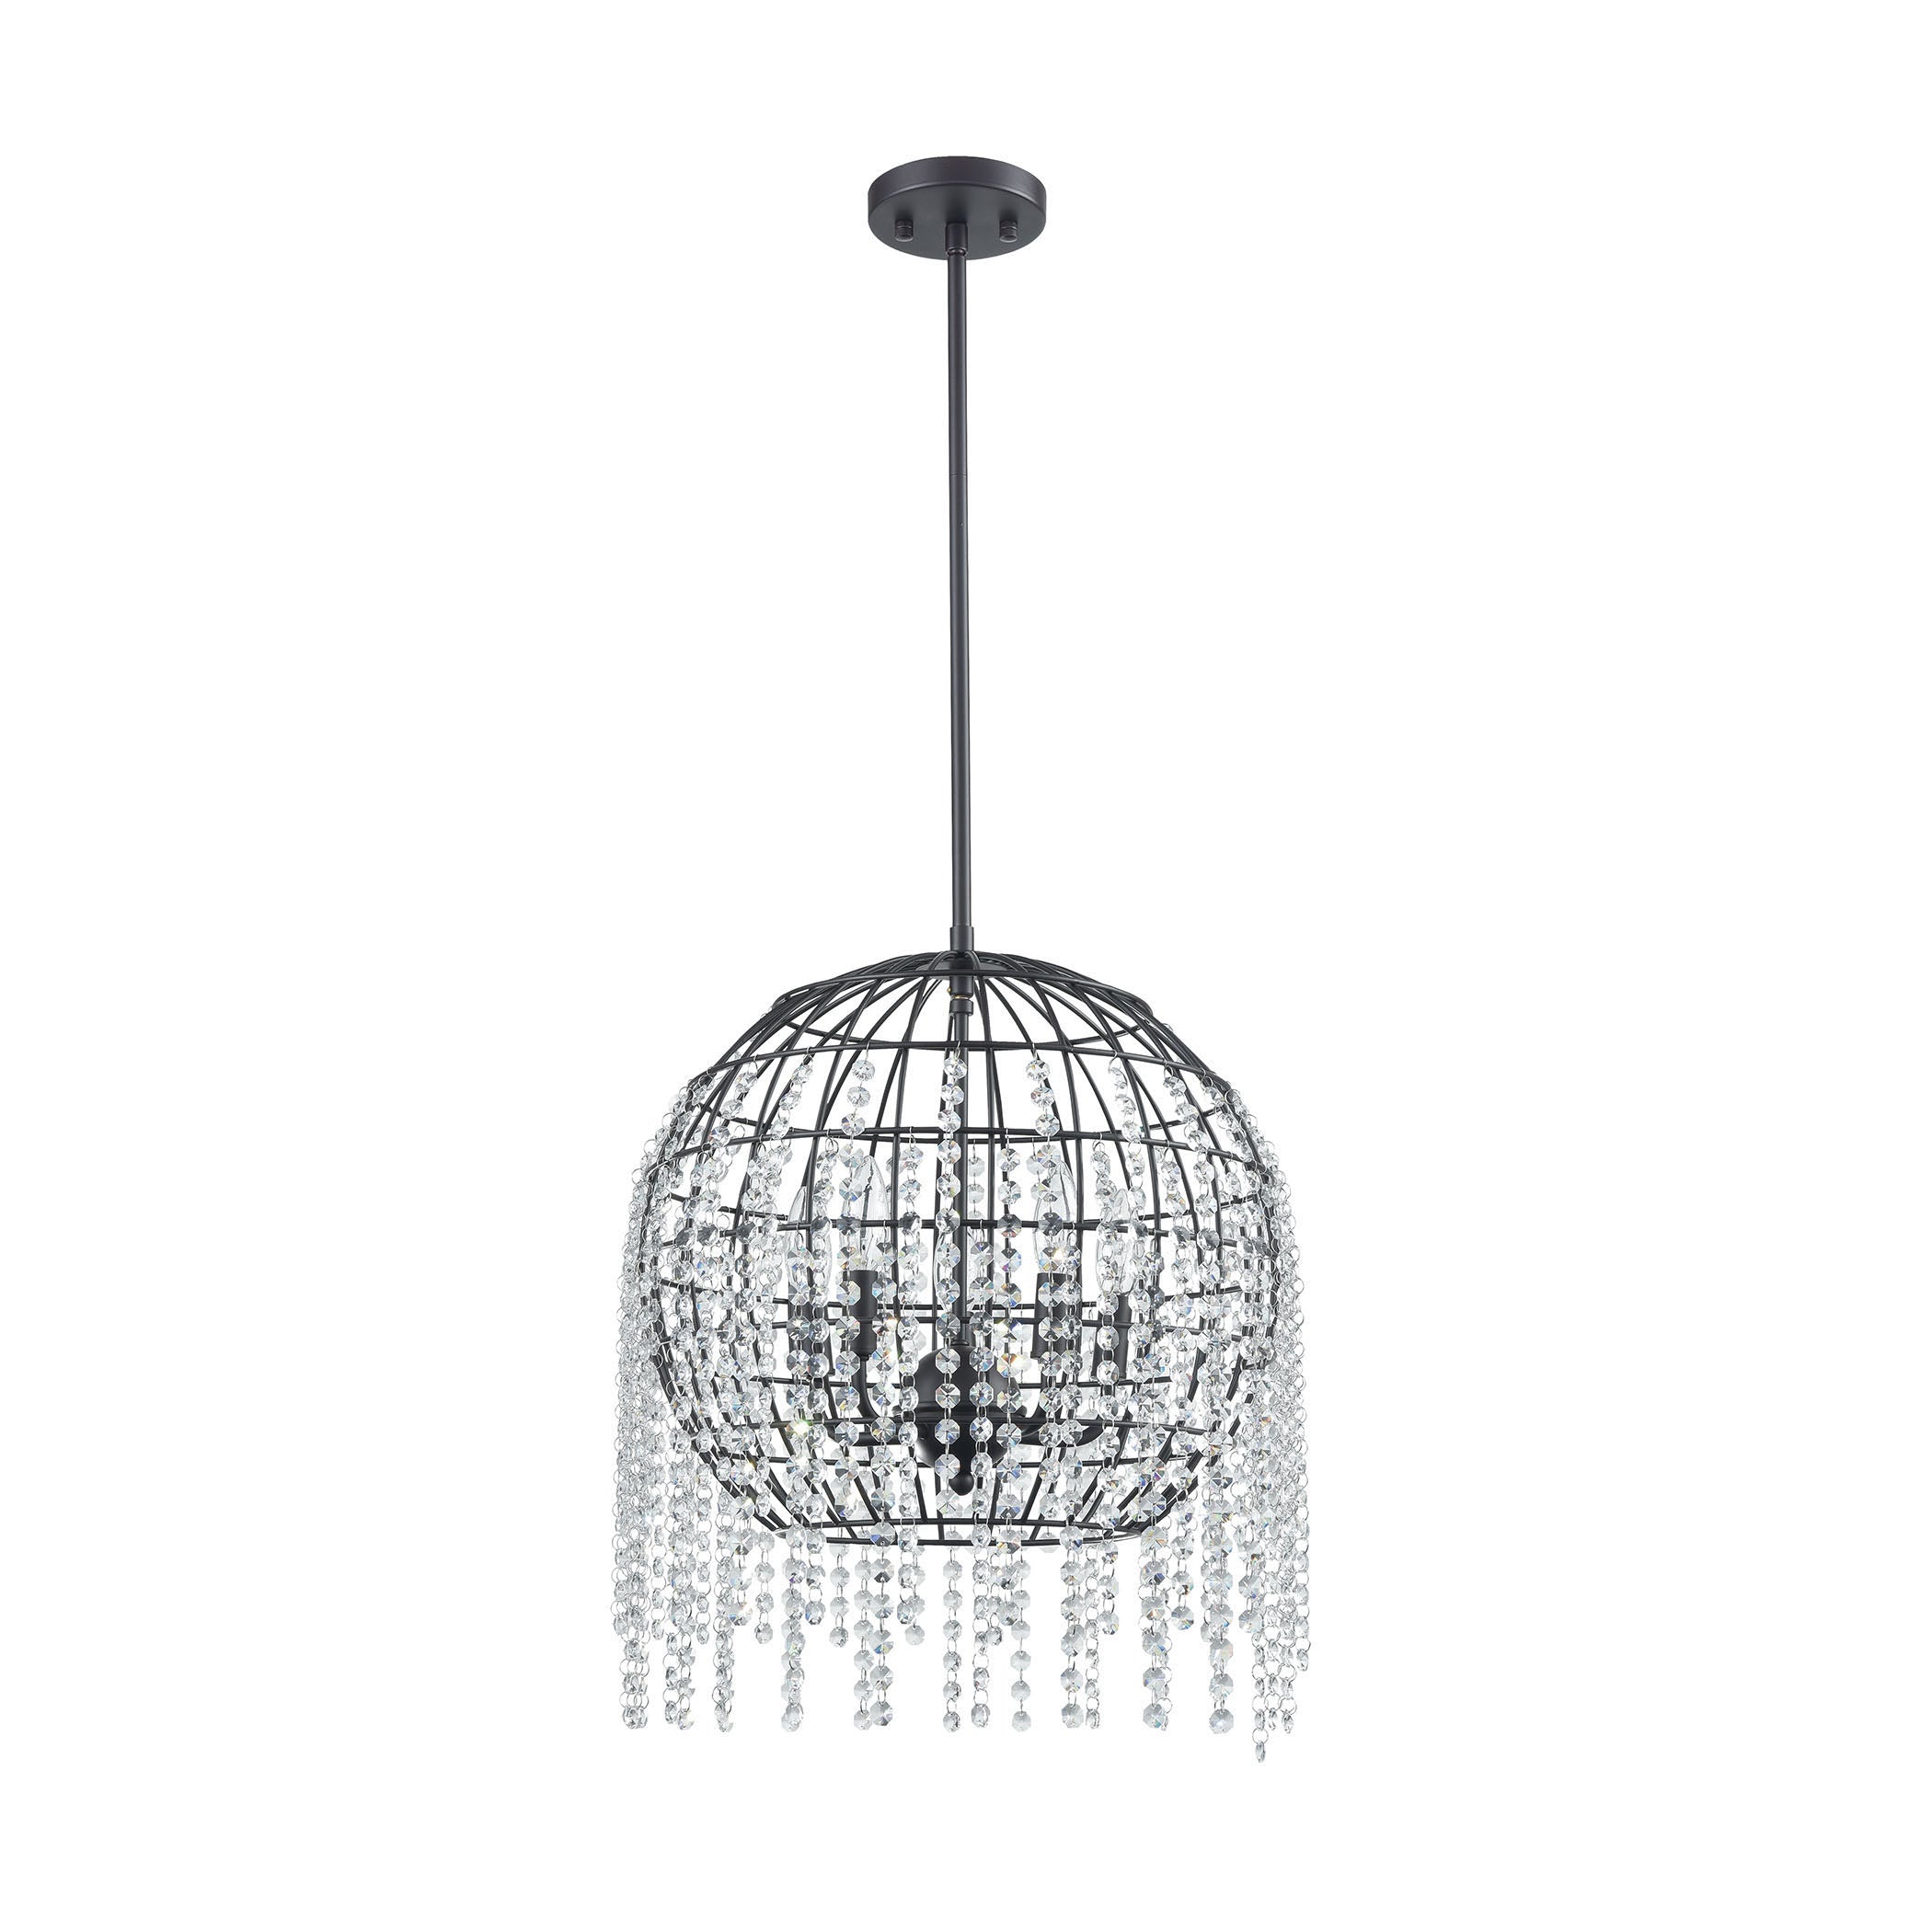 ELK Lighting 15305/5 Yardley 5-Light Chandelier in Oil Rubbed Bronze with Wire Cage and Clear Crystal